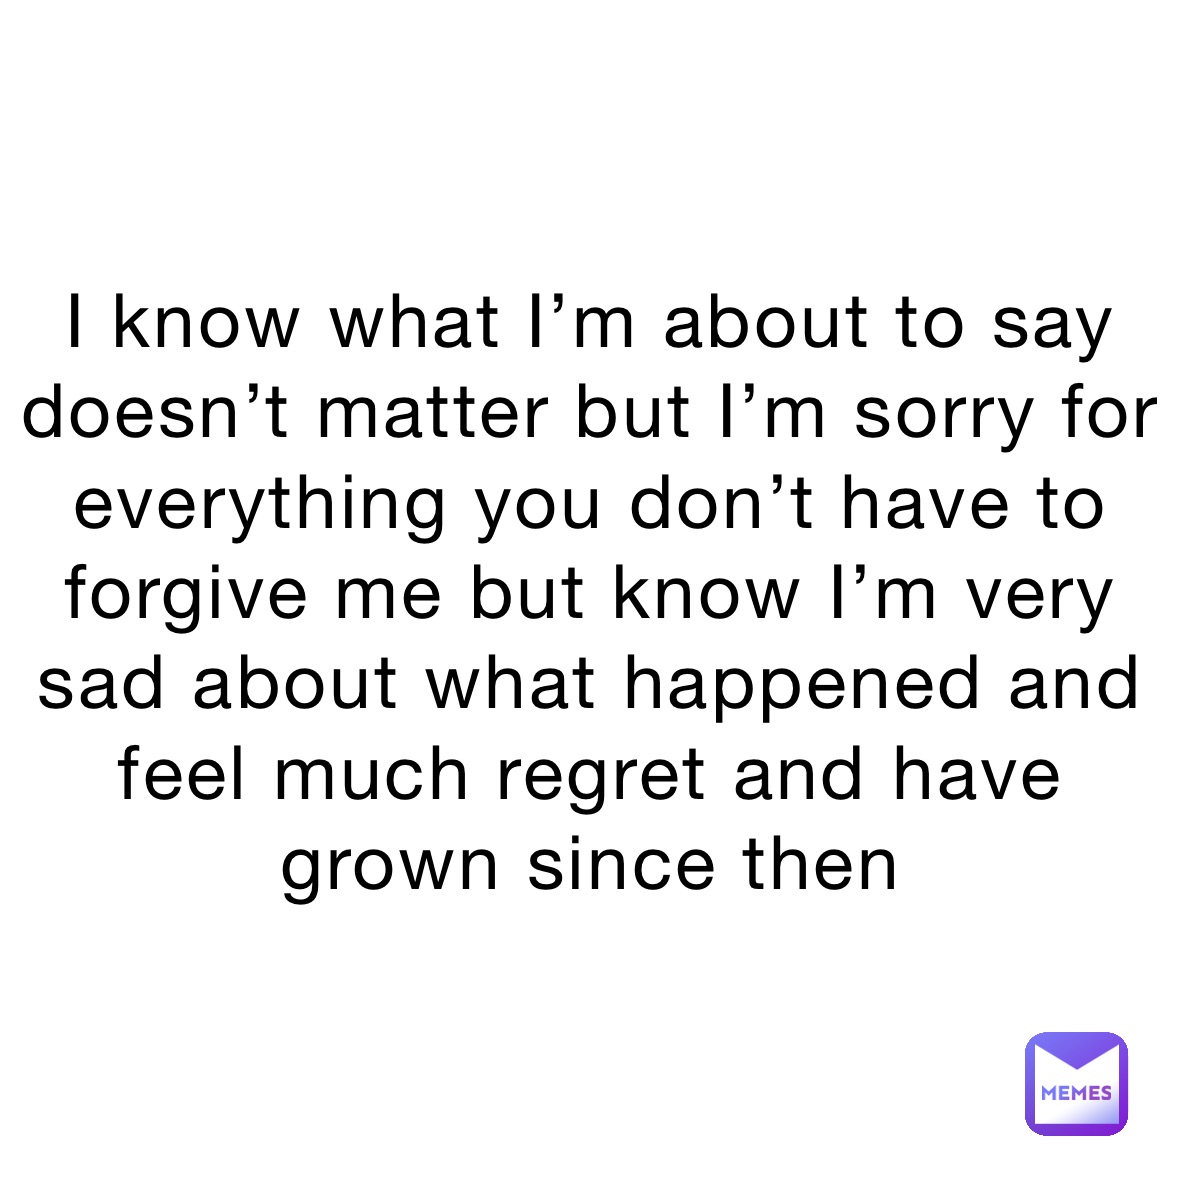 I know what I’m about to say doesn’t matter but I’m sorry for everything you don’t have to forgive me but know I’m very sad about what happened and feel much regret and have grown since then